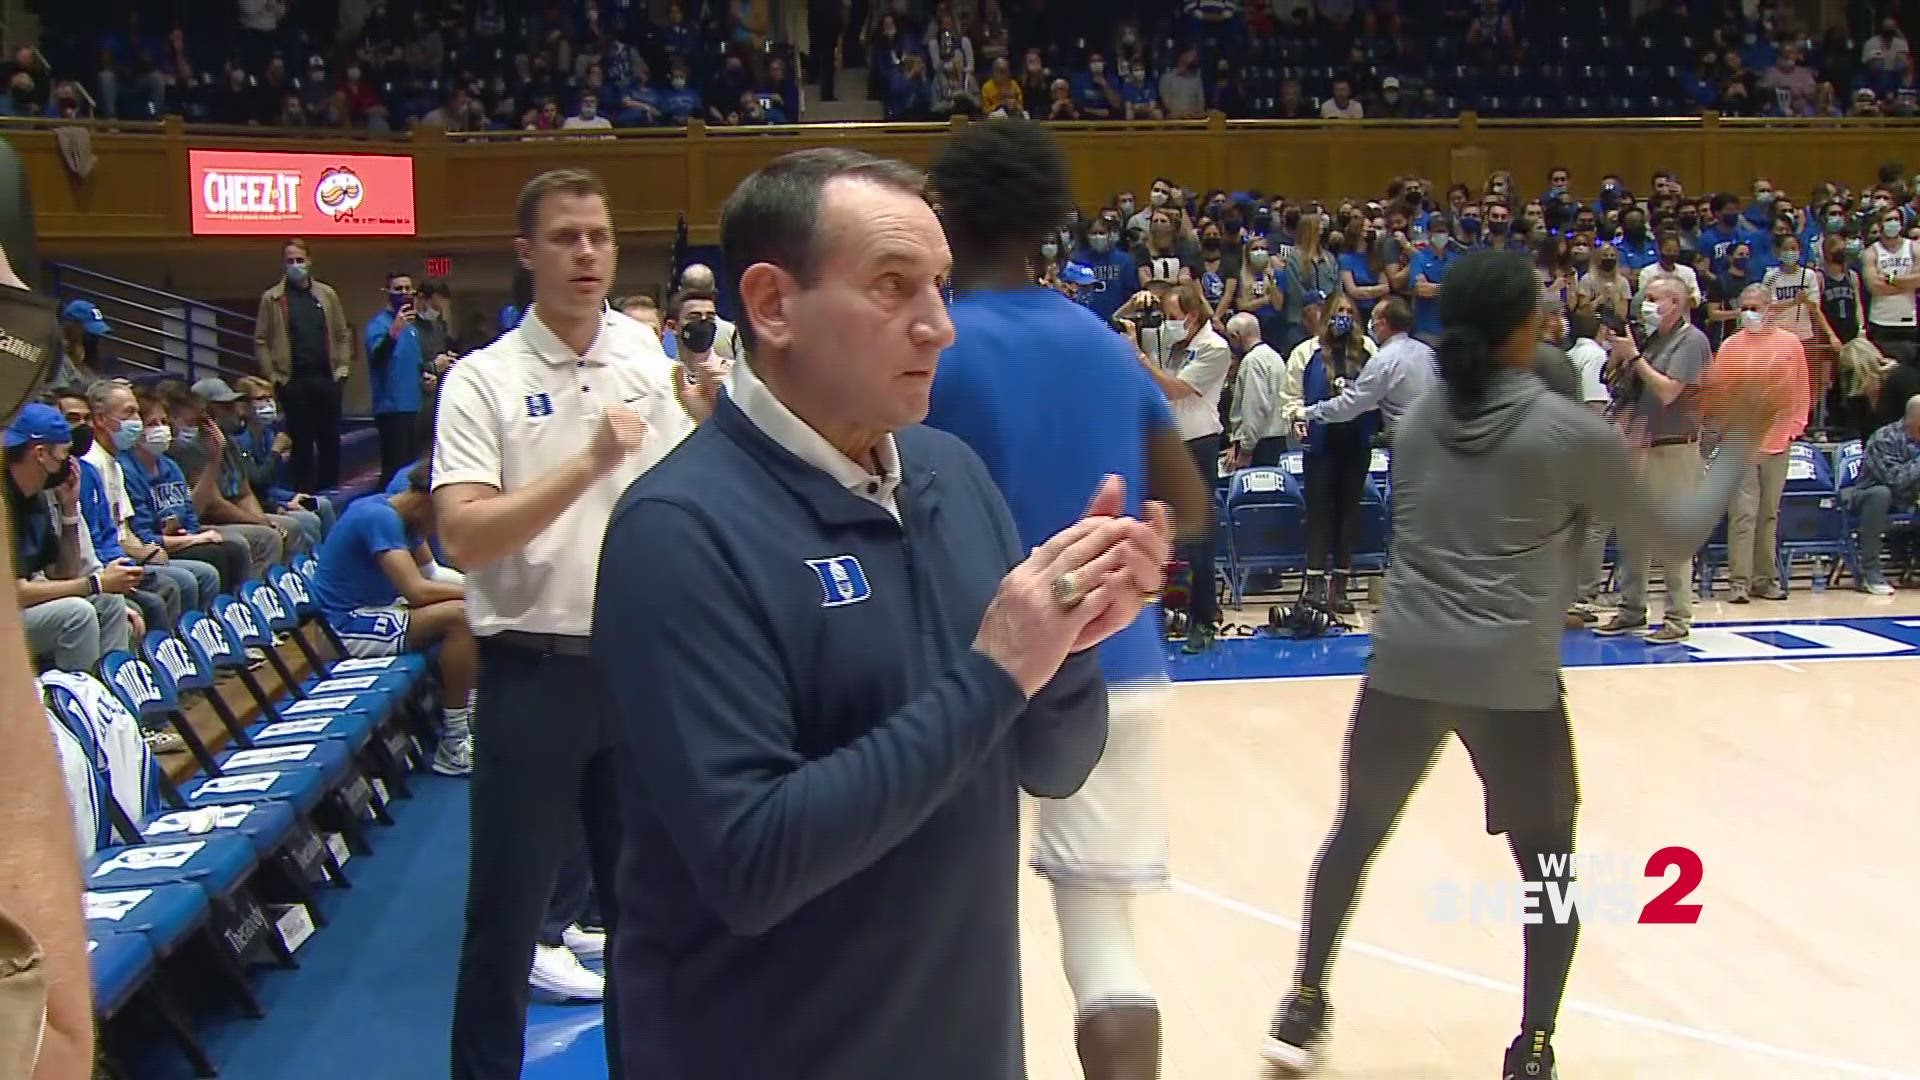 Duke University announced head men’s basketball coach Mike Krzyzewski will miss Wednesday night’s game at Wake Forest due to a non-COVID-19 related virus.